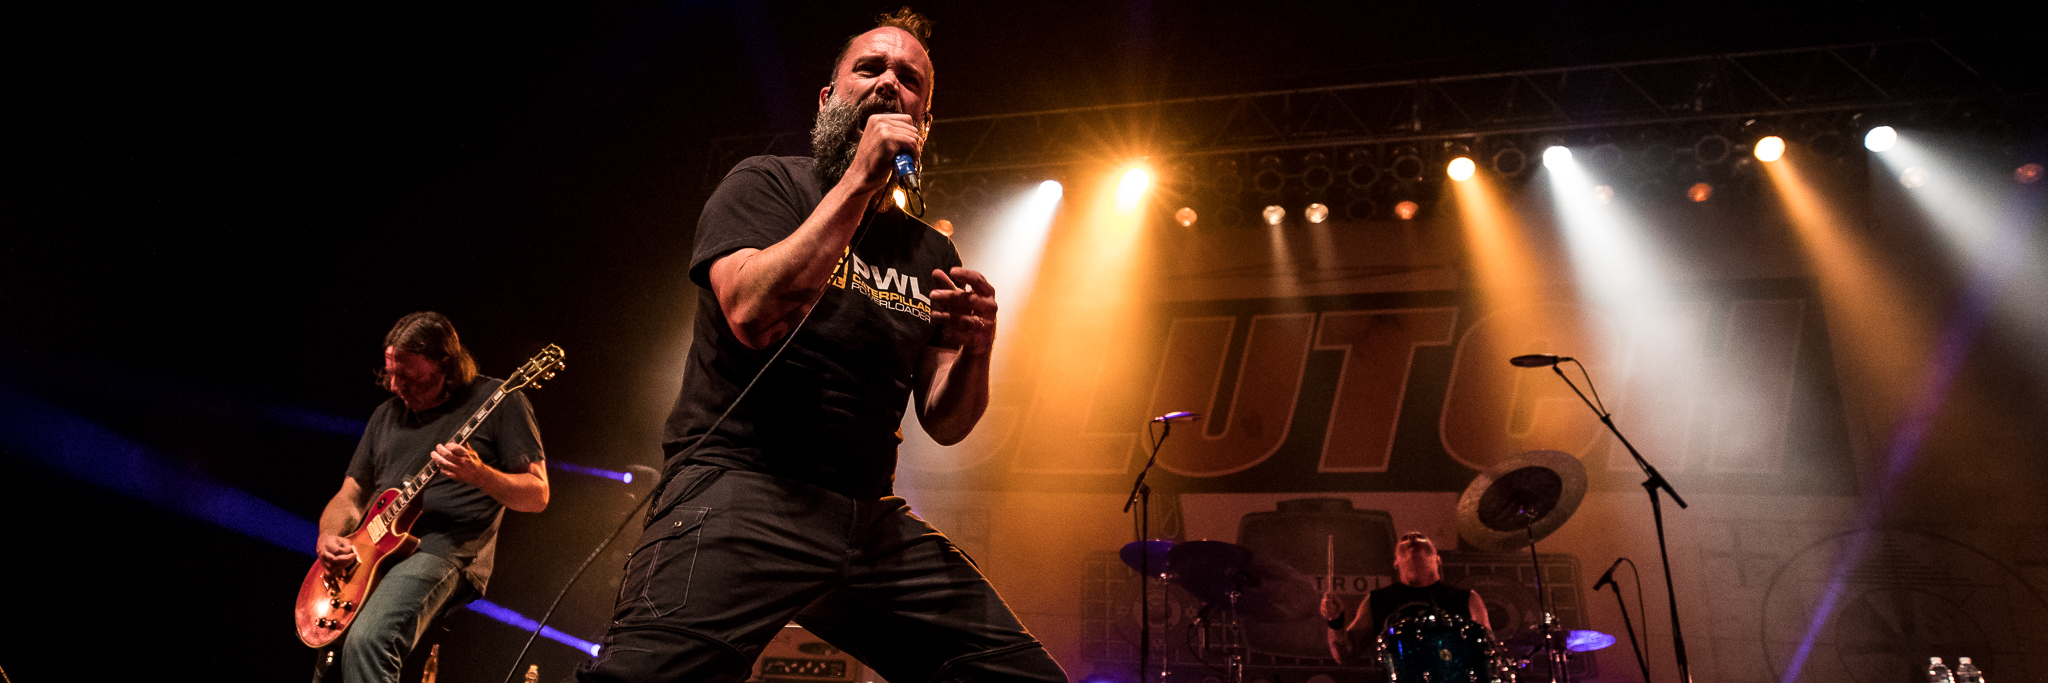 Clutch and Killswitch Engage Are Interesting Co-Headliners, But Rock Is Rock